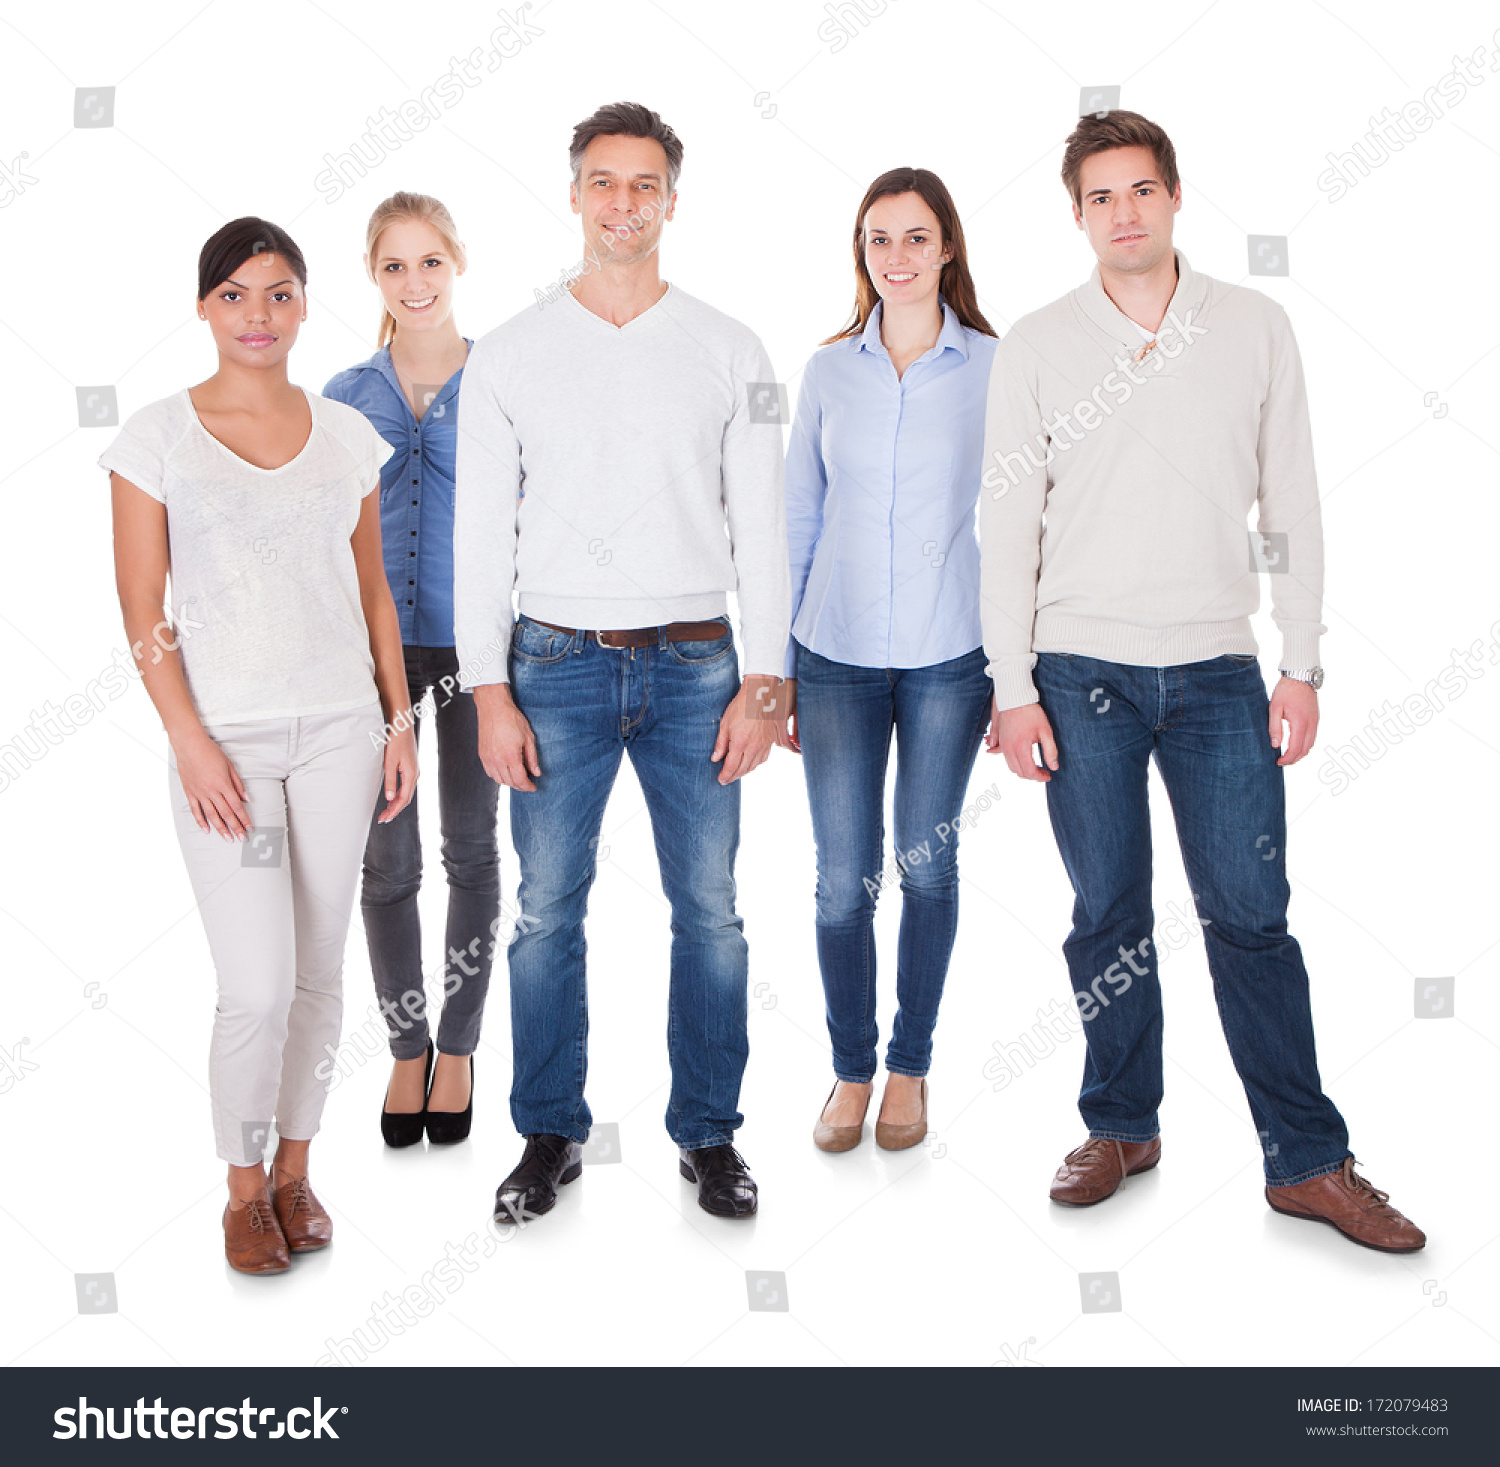 Group Happy People Standing Over White Stock Photo 172079483 - Shutterstock